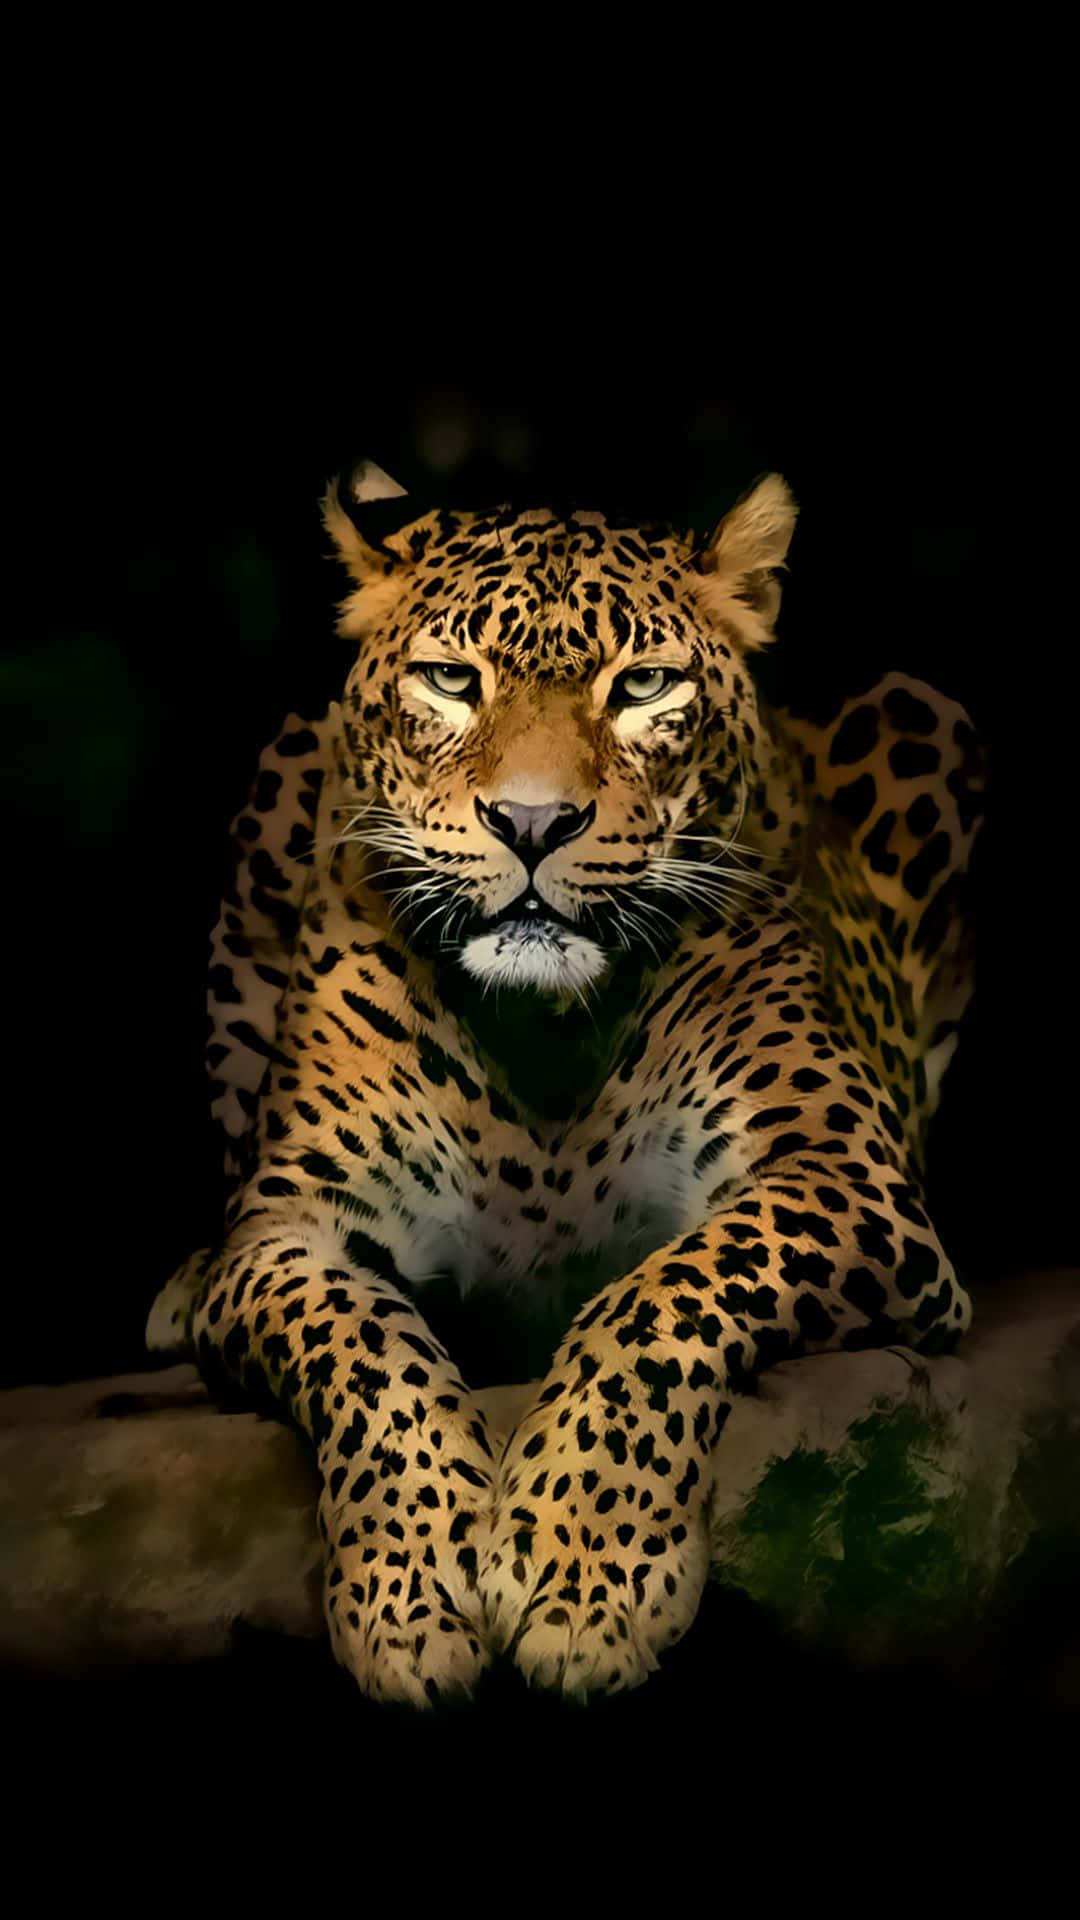 Leopard With A Serious Expression Wallpaper